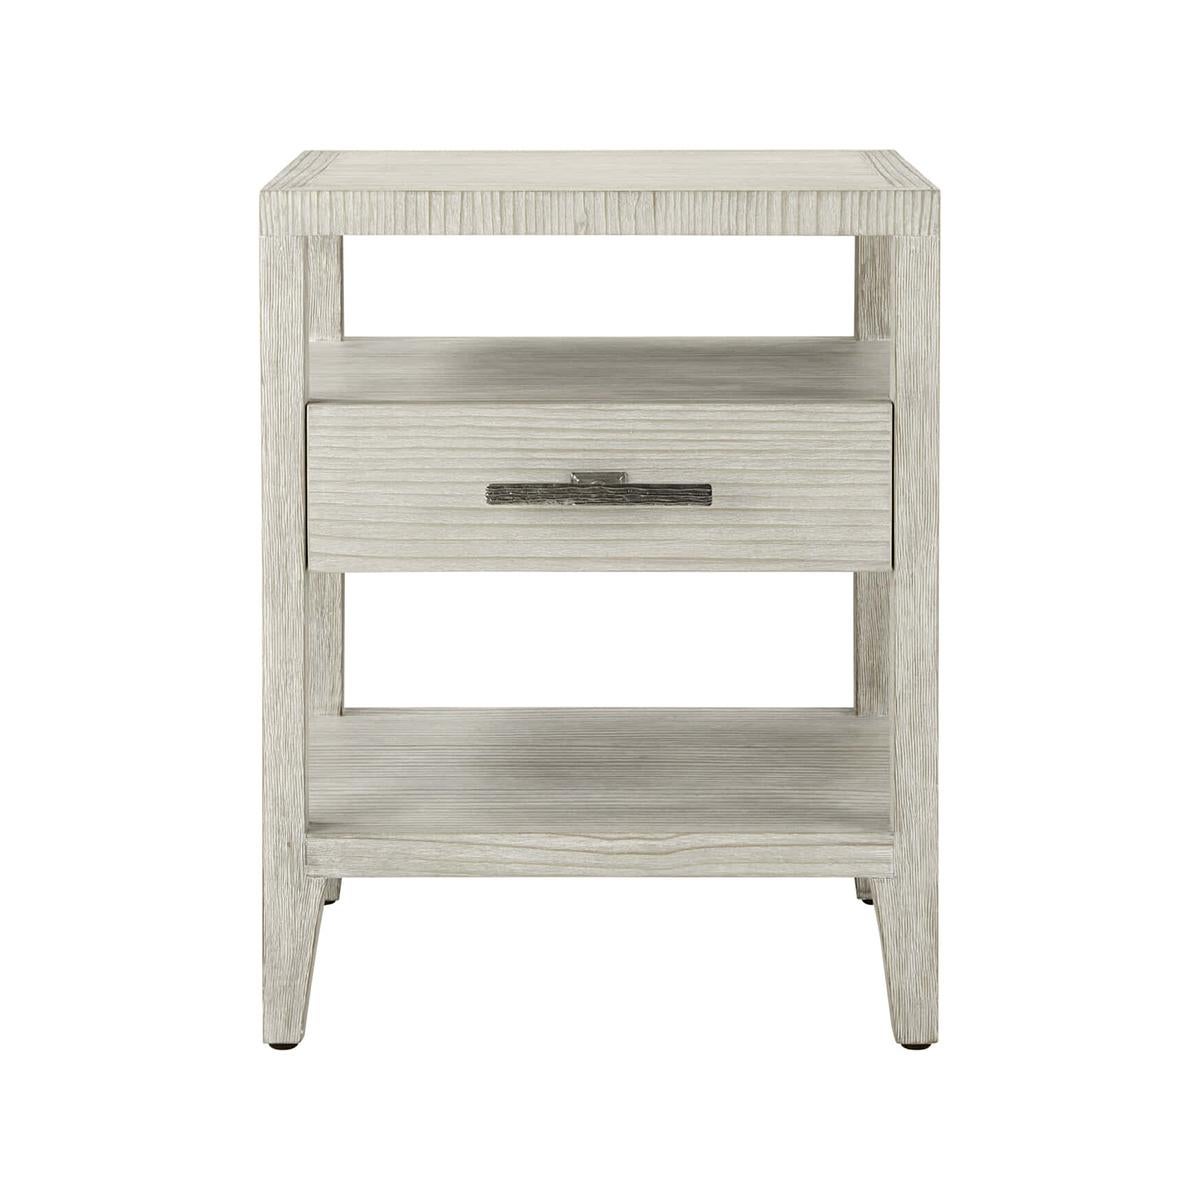 Coastal One Drawer Nightstand, composed of wire-brushed cerused pine with the functionality to store and display your favorite decor, this nightstand is the perfect accent piece for any bedroom. Finished with a singular organic ribbed metal bar pull